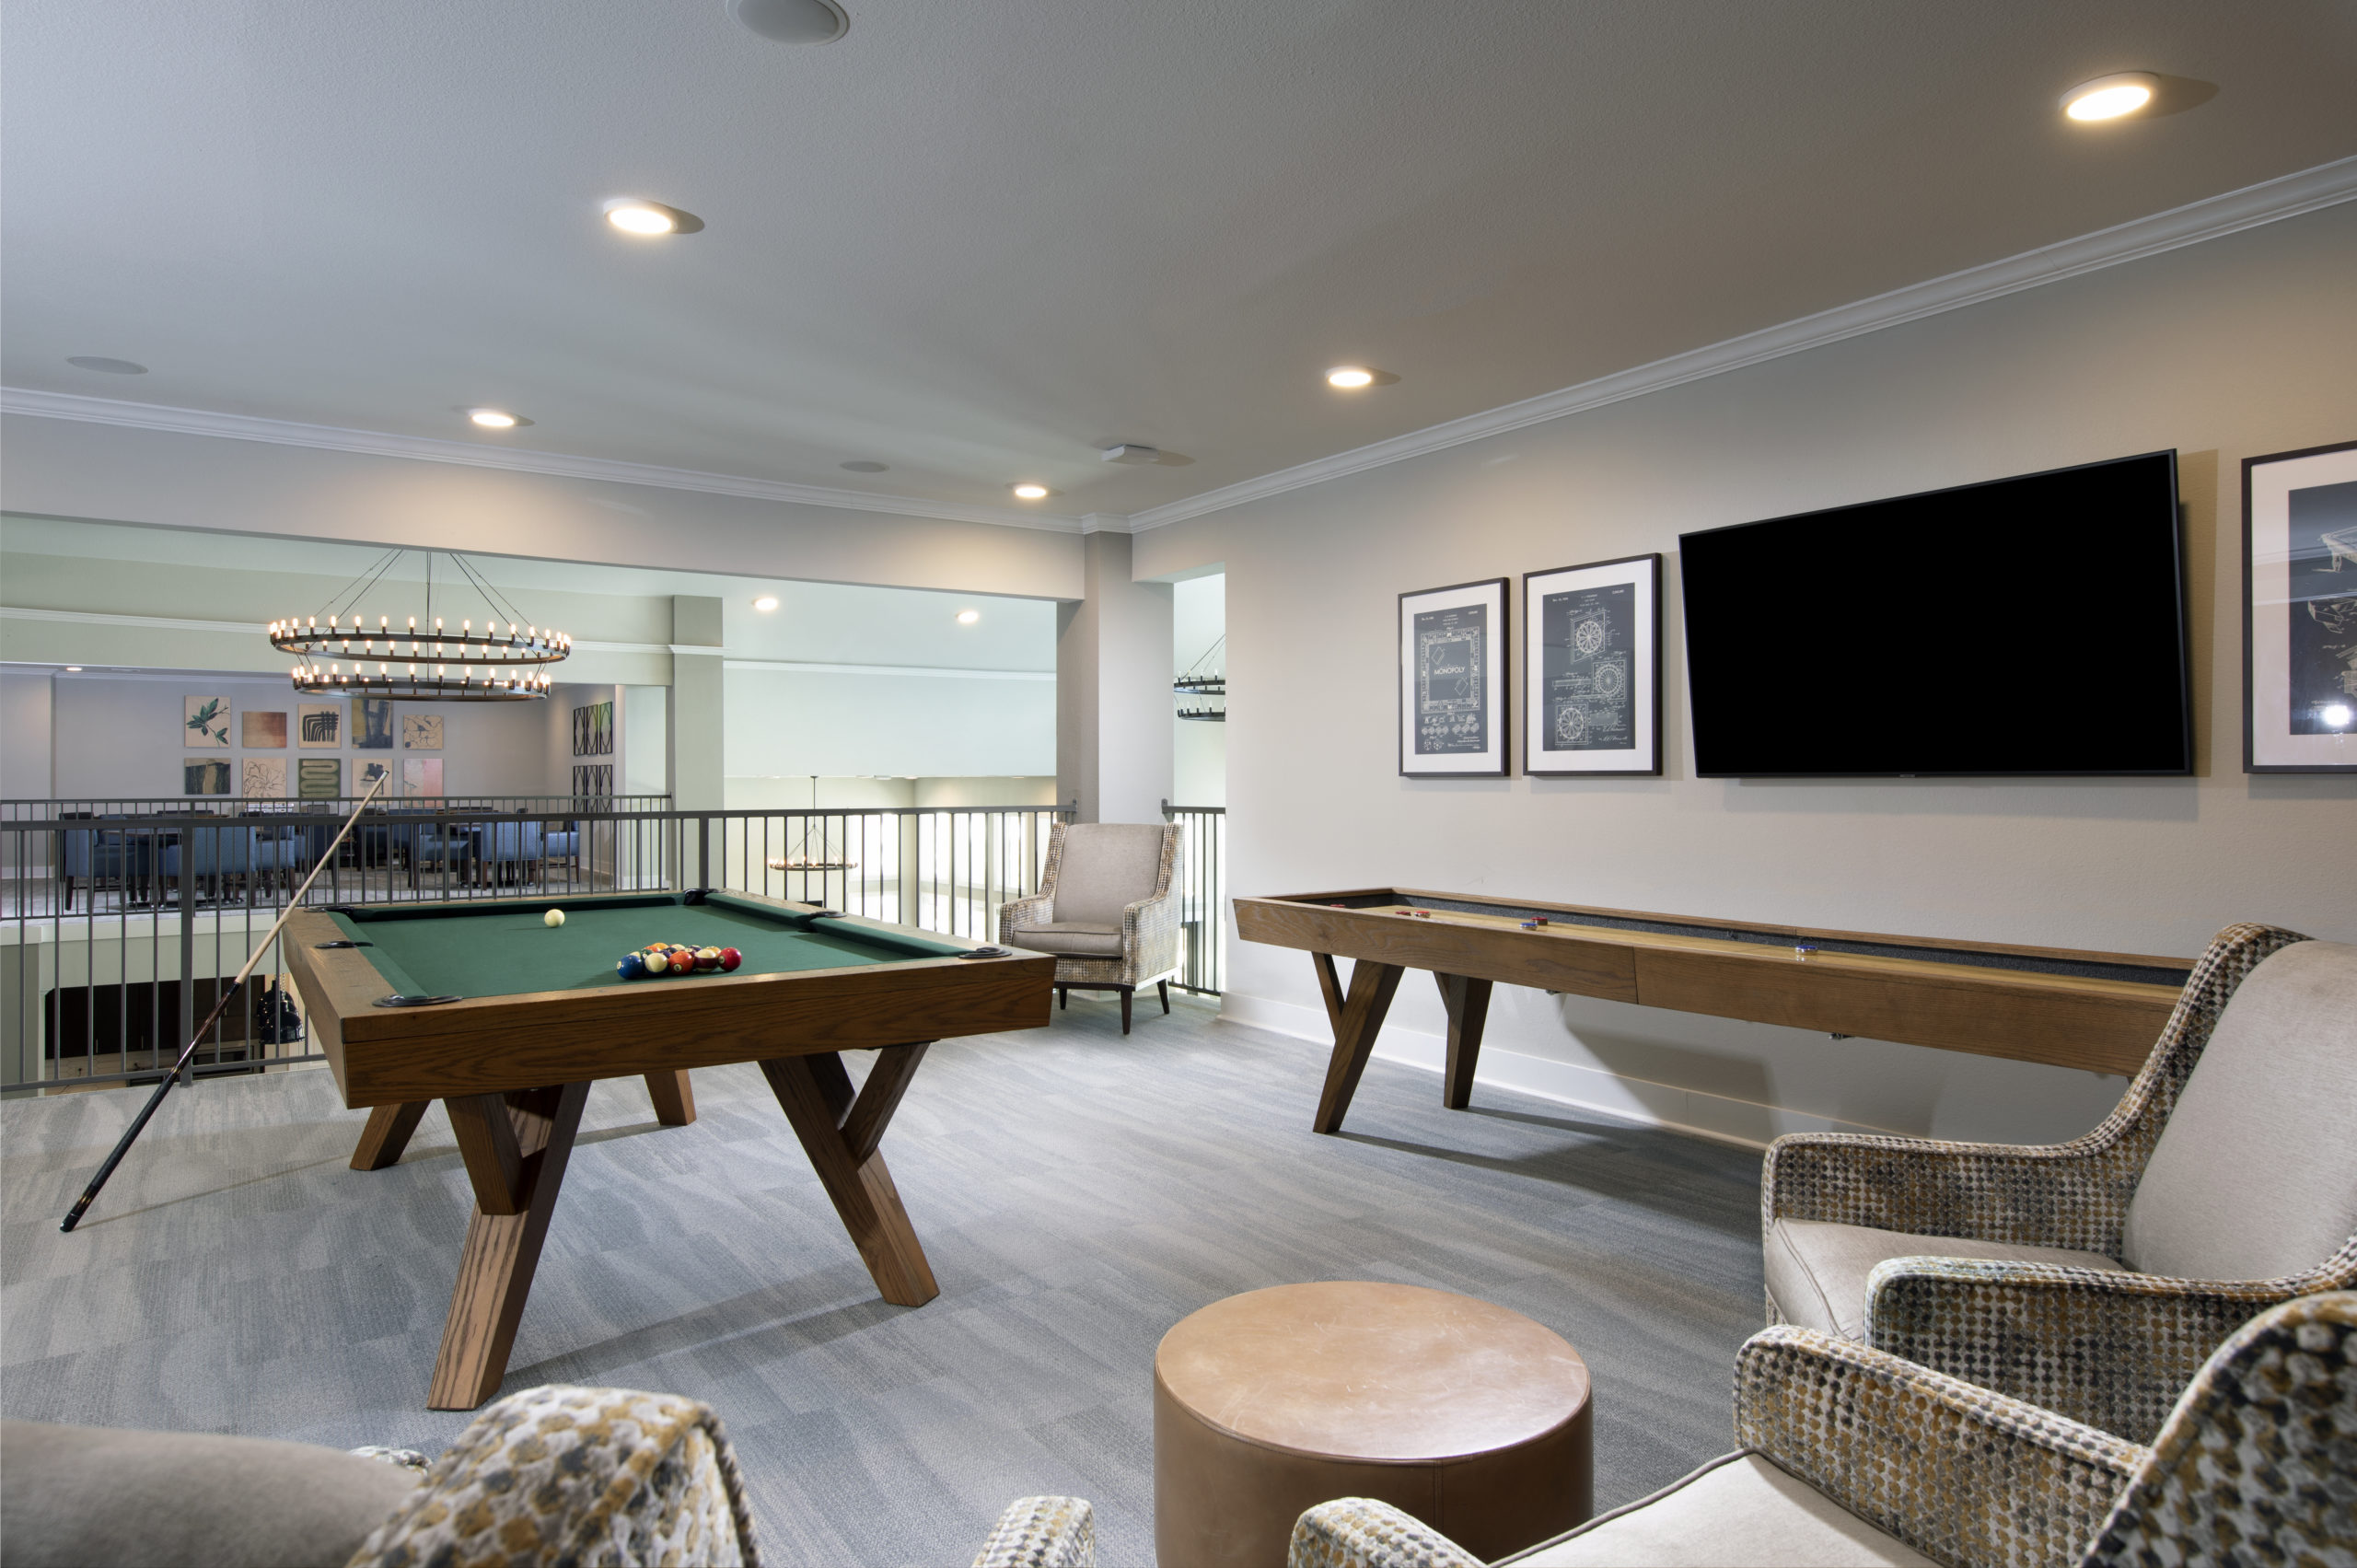 Game room at Solea Keller Apartments in Fort Worth Texas